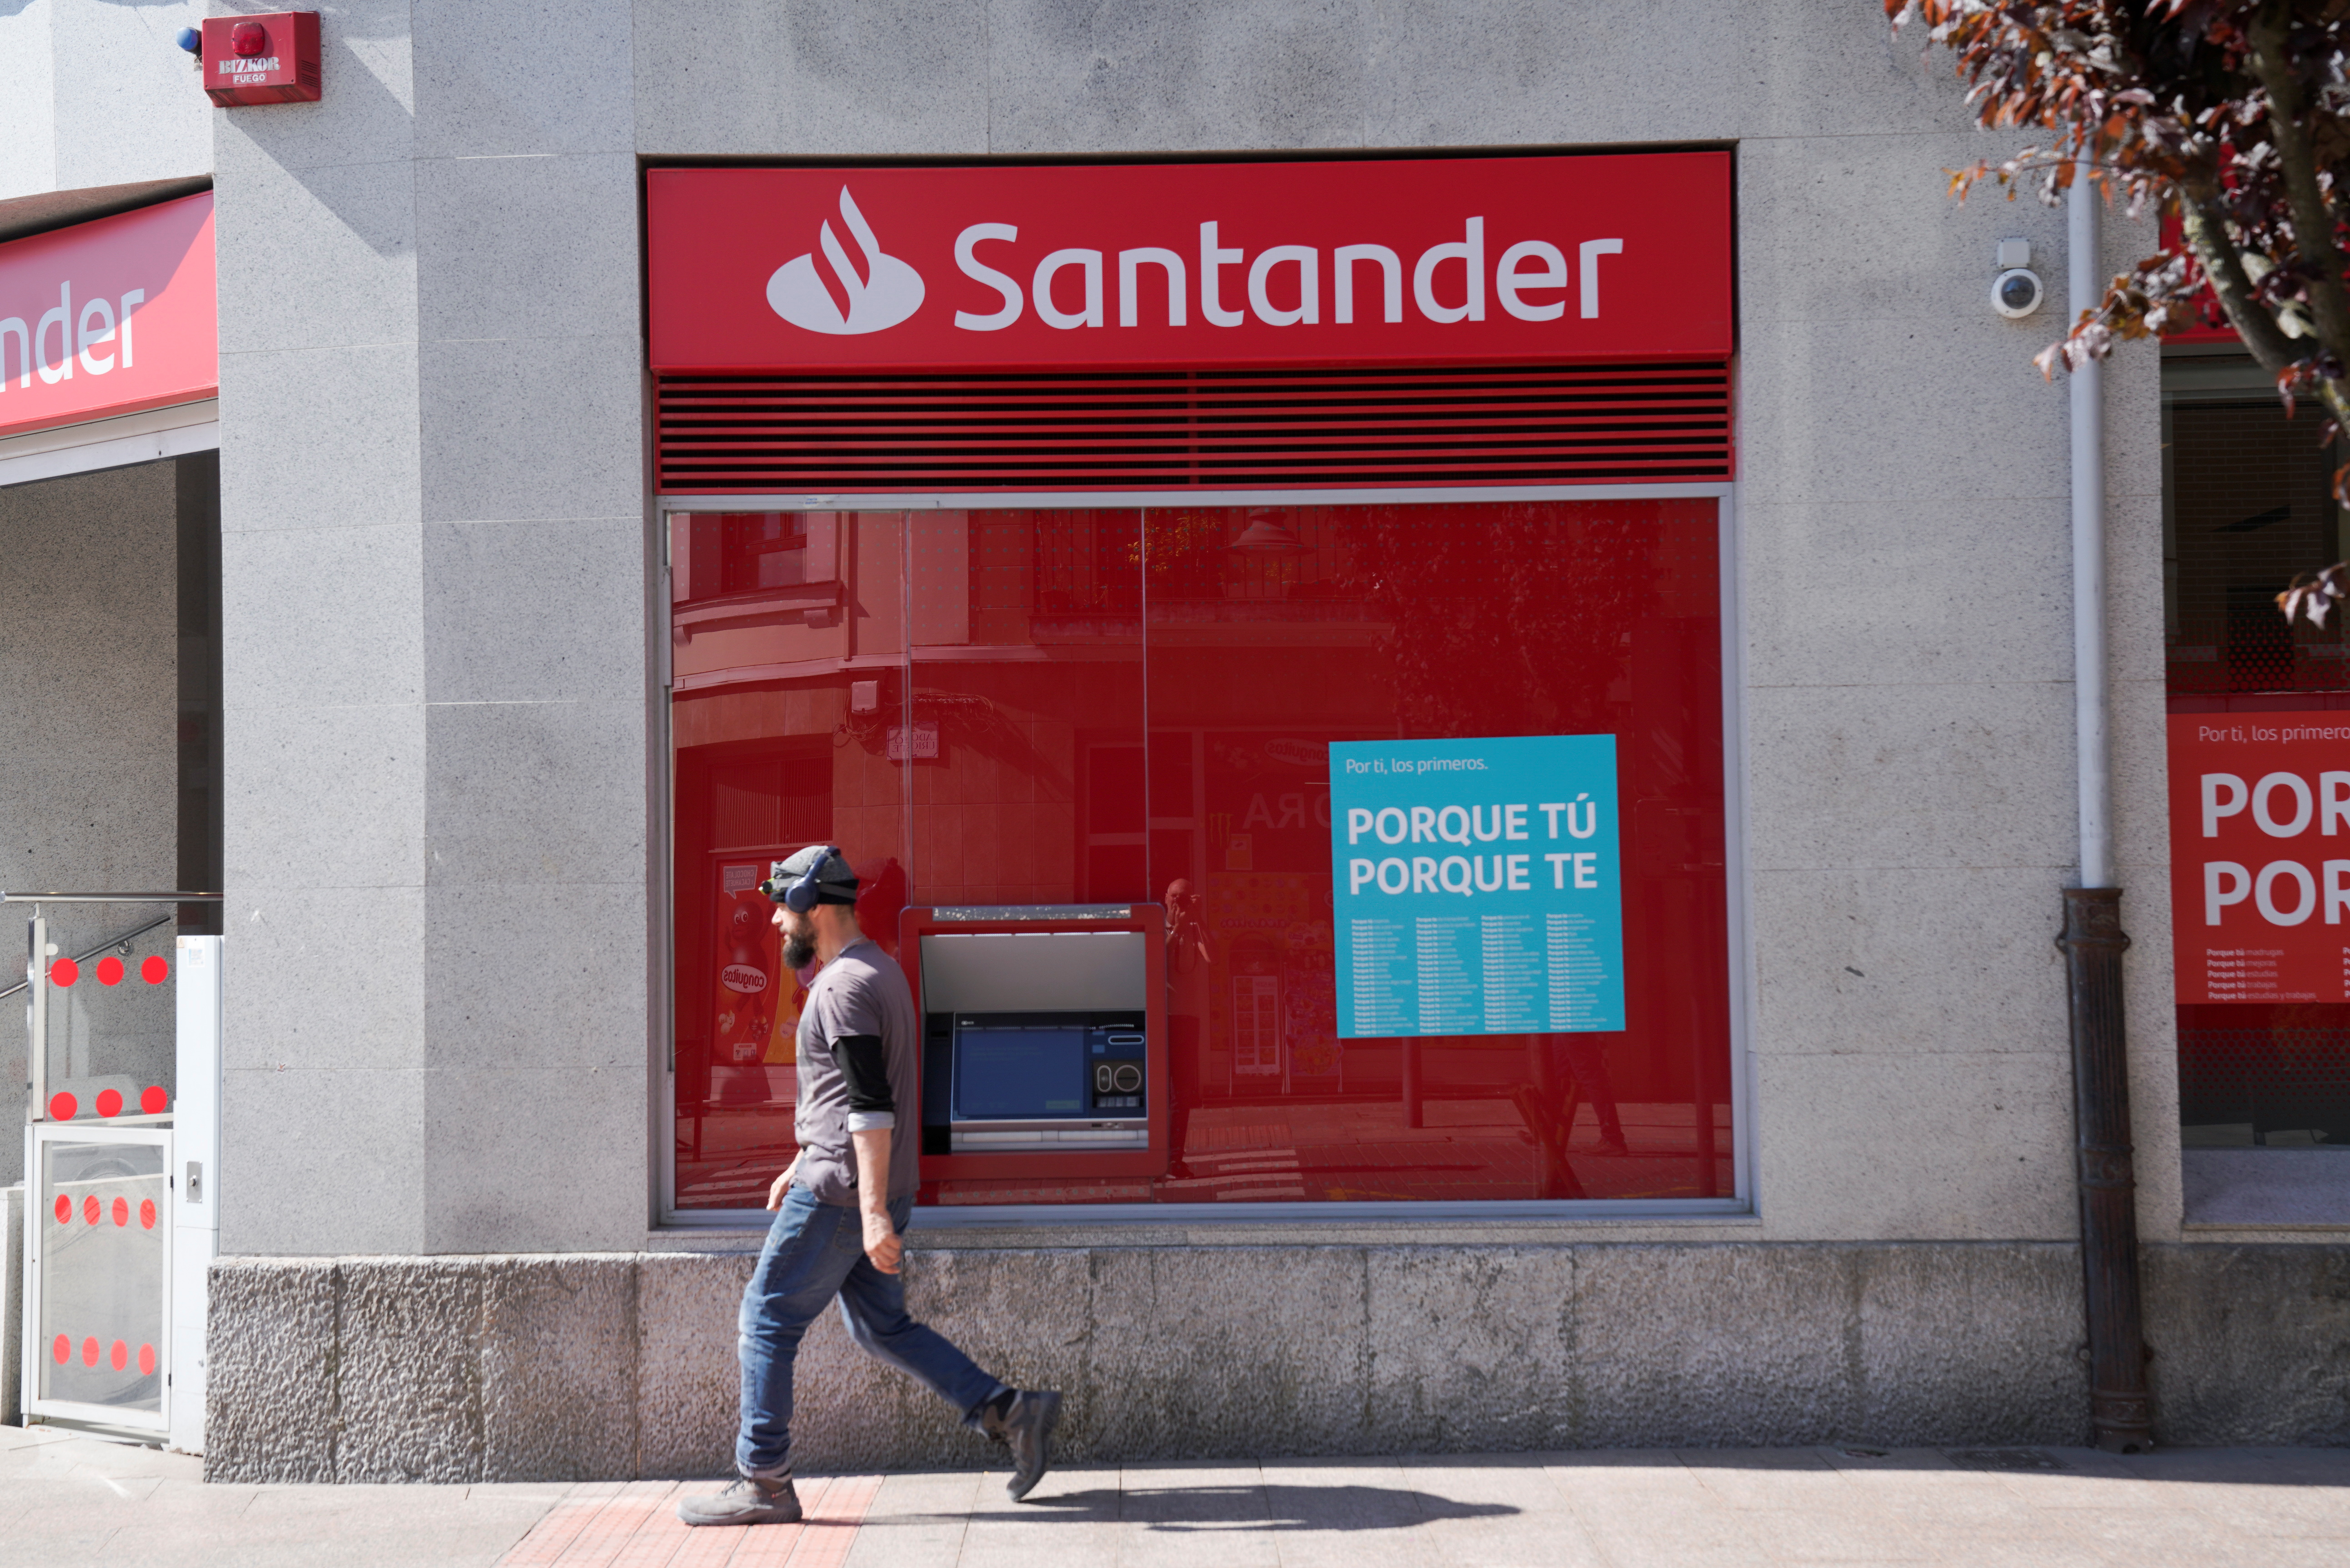 pust grill Justering Santander appoints Grisi as new CEO to oversee growth, digital push |  Reuters